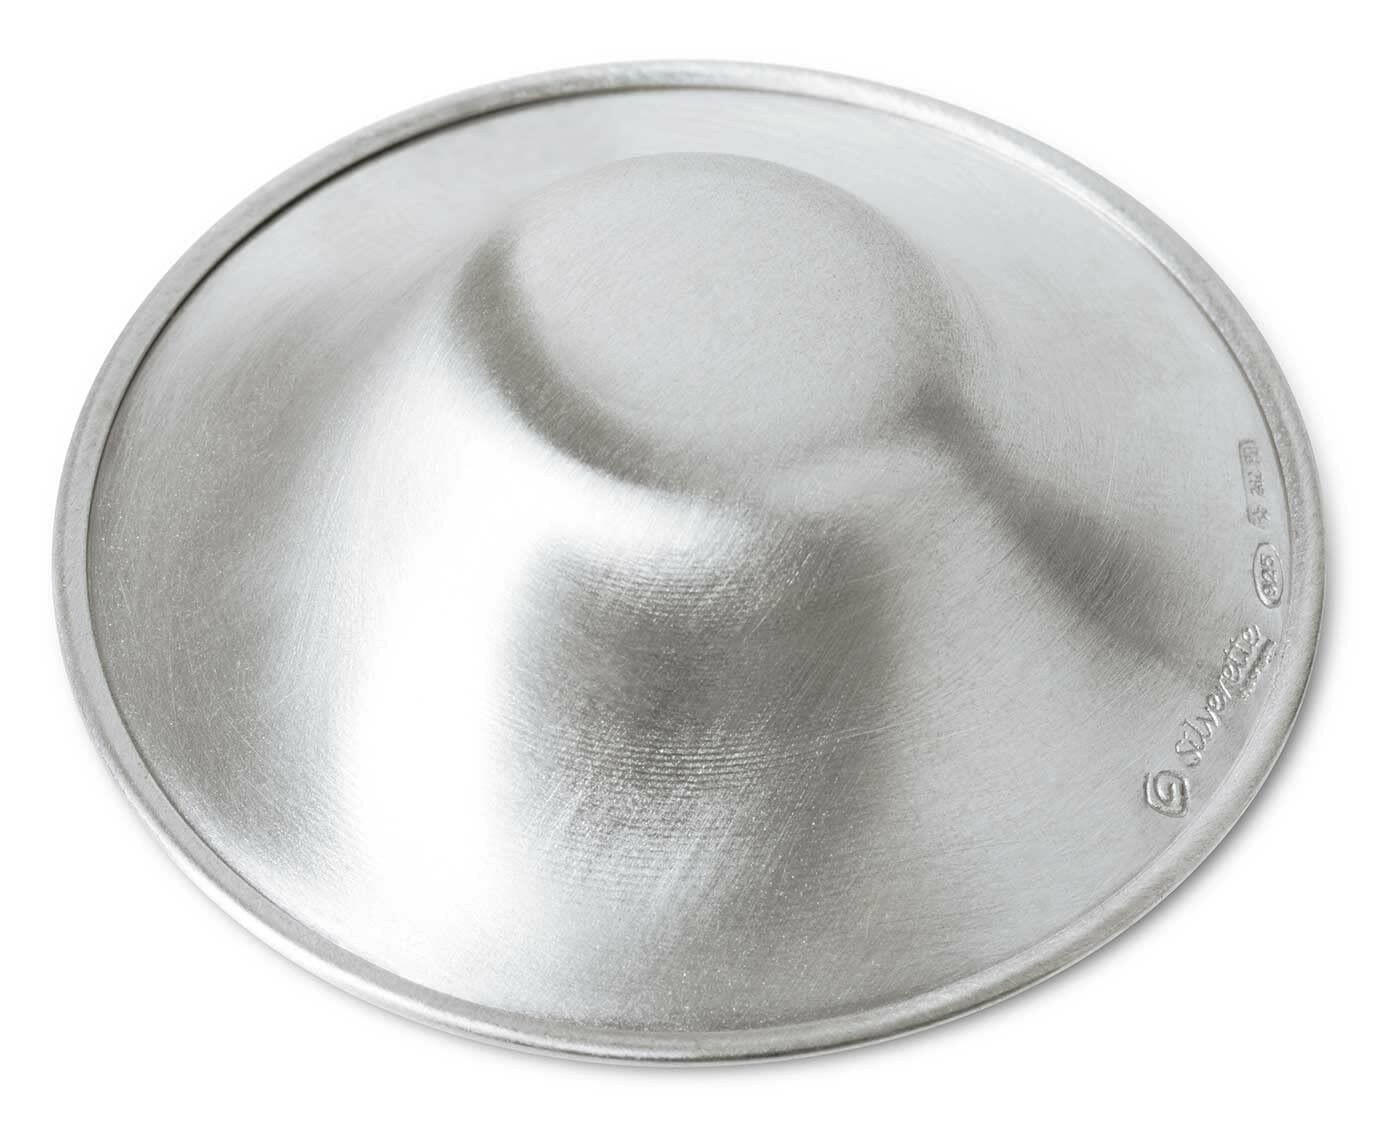 SILVERETTE The Original Silver Nursing Cups - Soothe and Protect Your Nursing Nipples